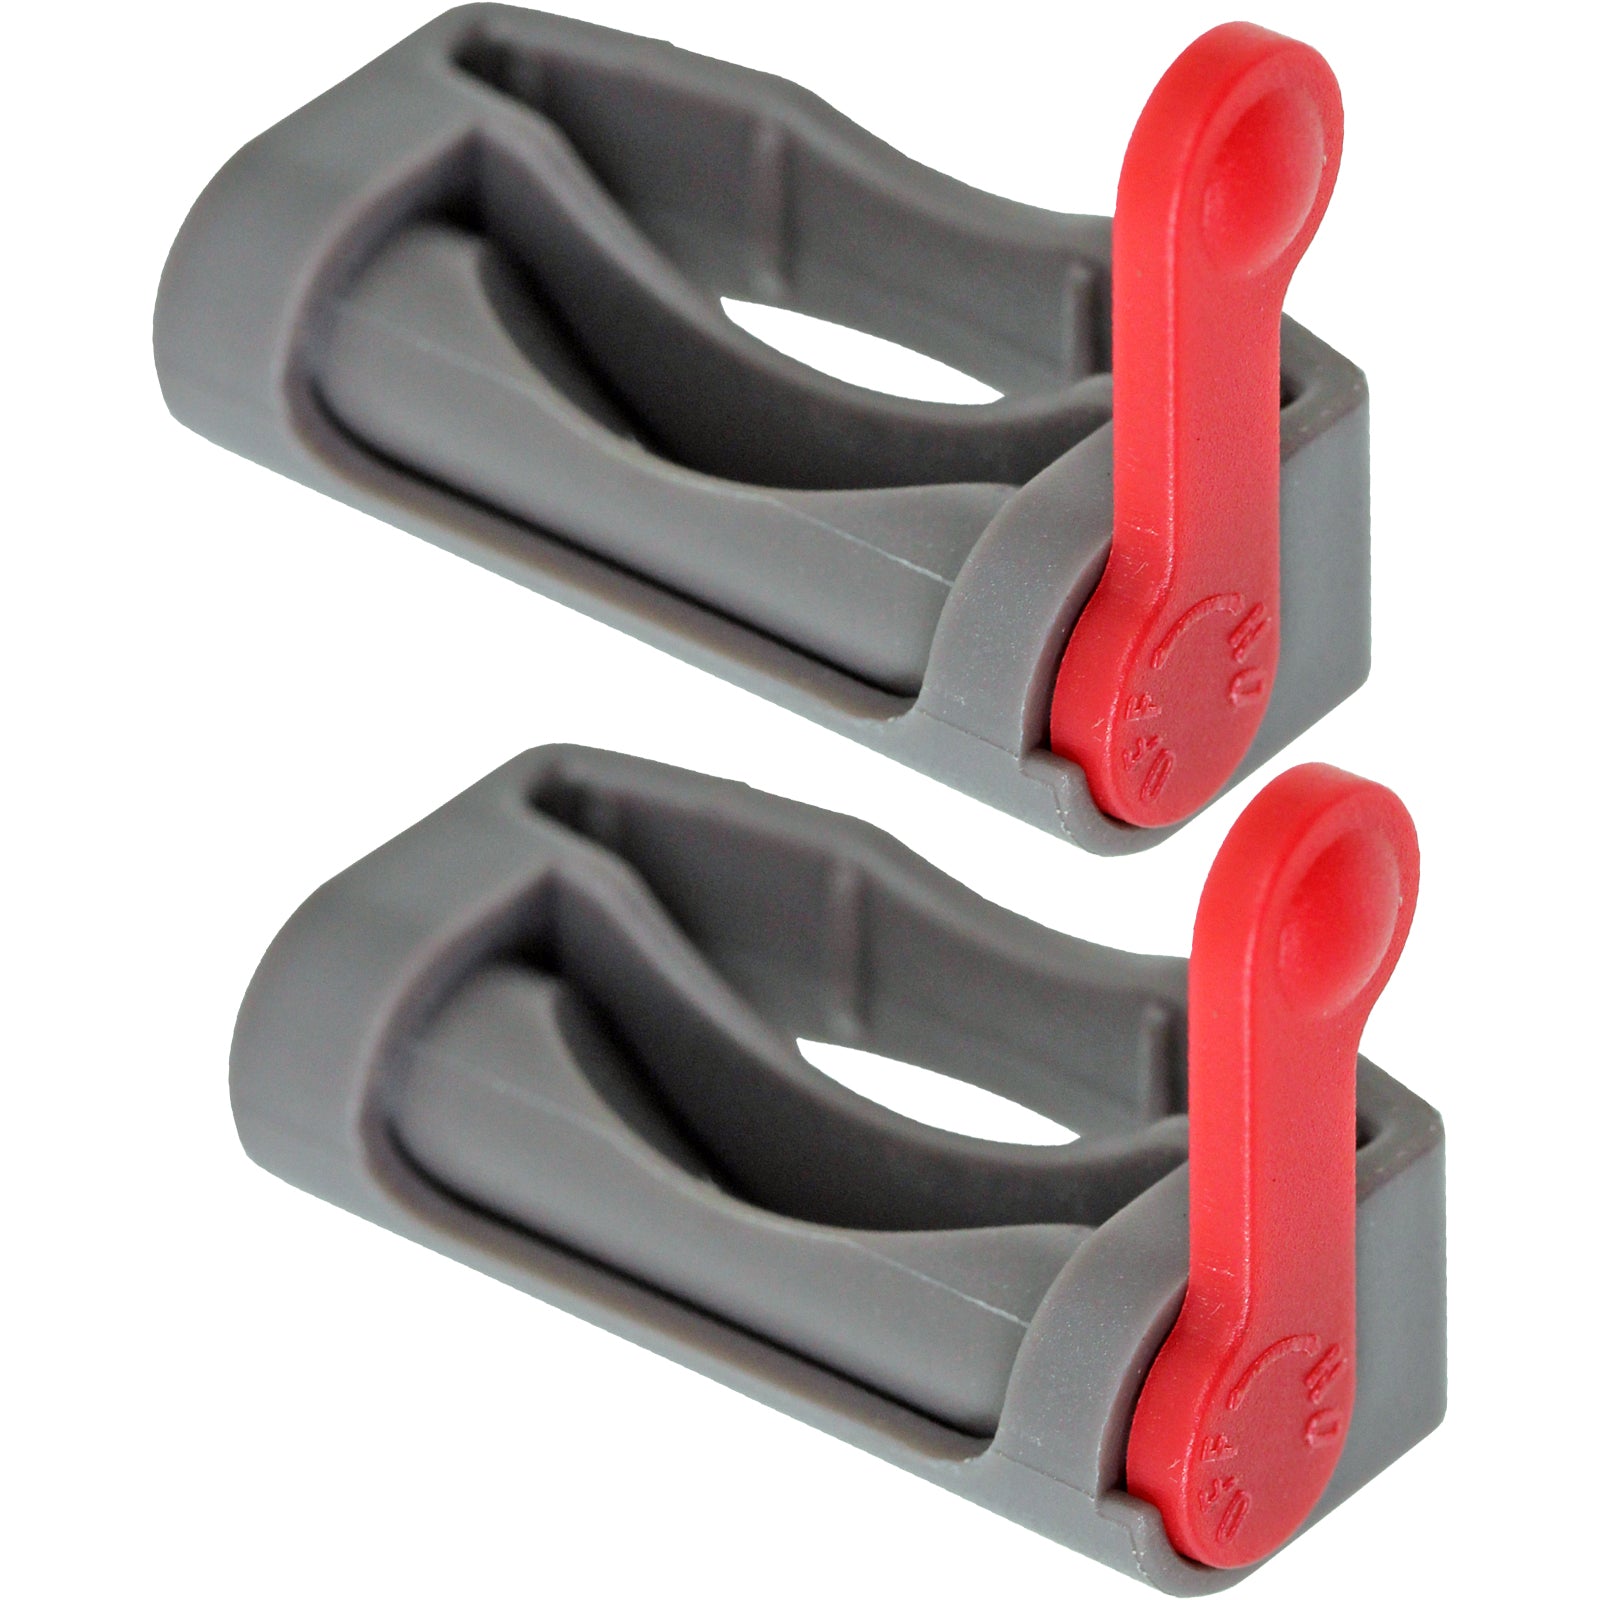 Trigger Lock for DYSON V6 Vacuum Cleaner Cordless Power Holder Button (Pack of 2)